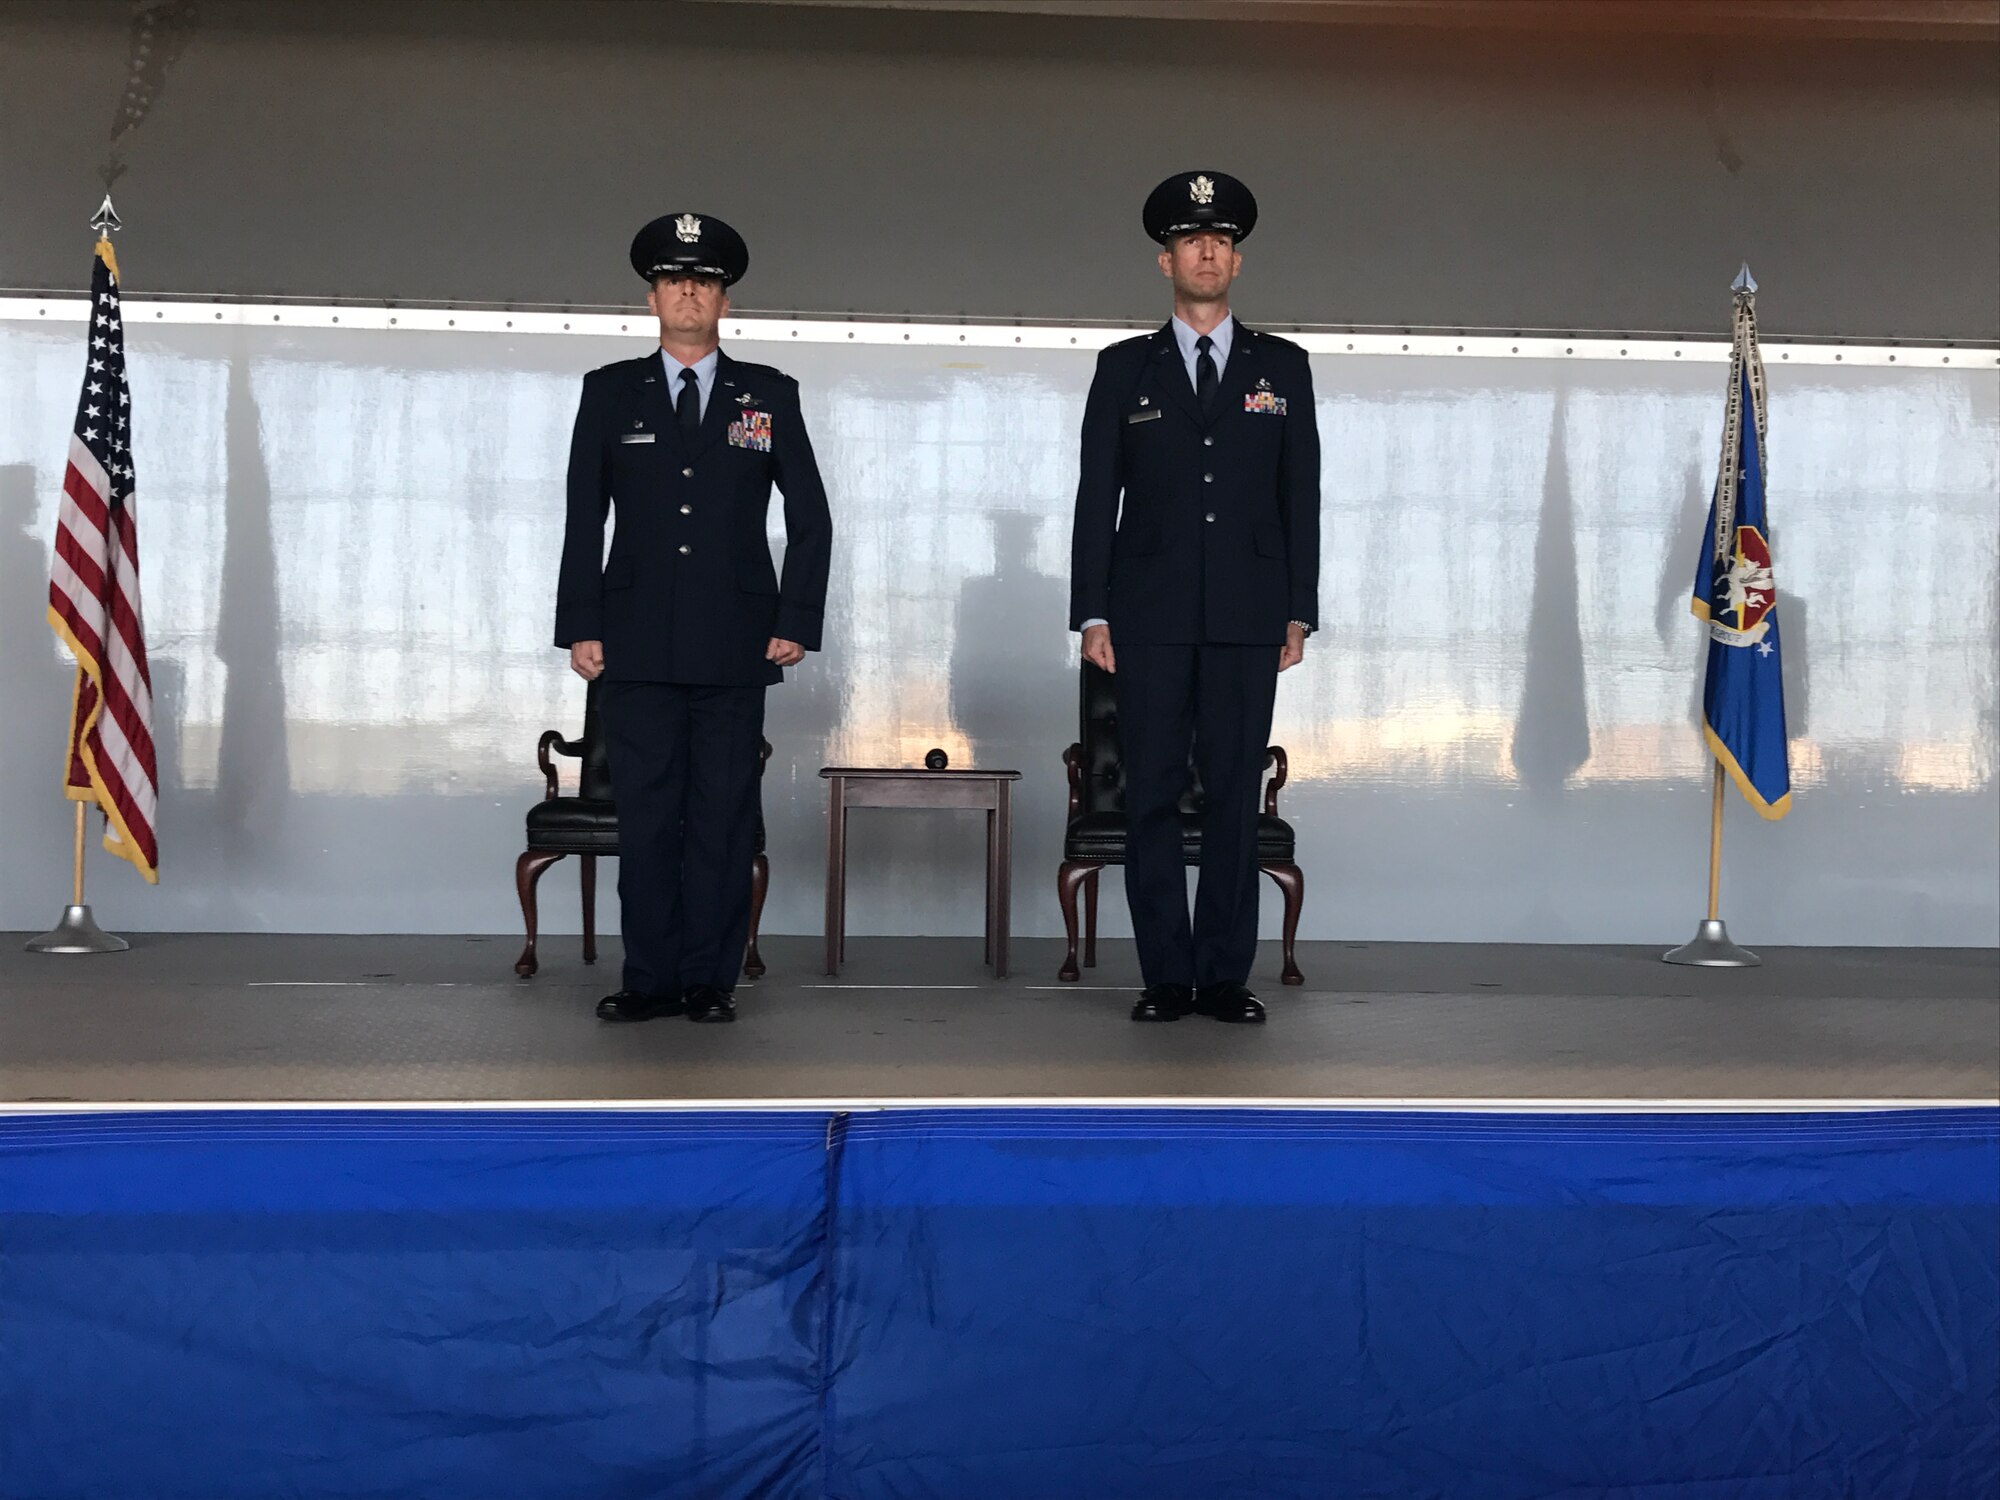 Colonel Frank Amodeo 927th Air Refueling Wing Commander stands with Lt. Col. Kristofer “Scot” Terry during an assumption of command ceremony held at MacDill Air Force Base, FL Dec. 3, 2016. Terry assumed command of the 927th Maintenance Group after serving at Air Force Reserve Headquarters as chief of the Aircraft Maintenance Management Branch. (U.S. Air Force photo by Senior Airman Xavier Lockley) 